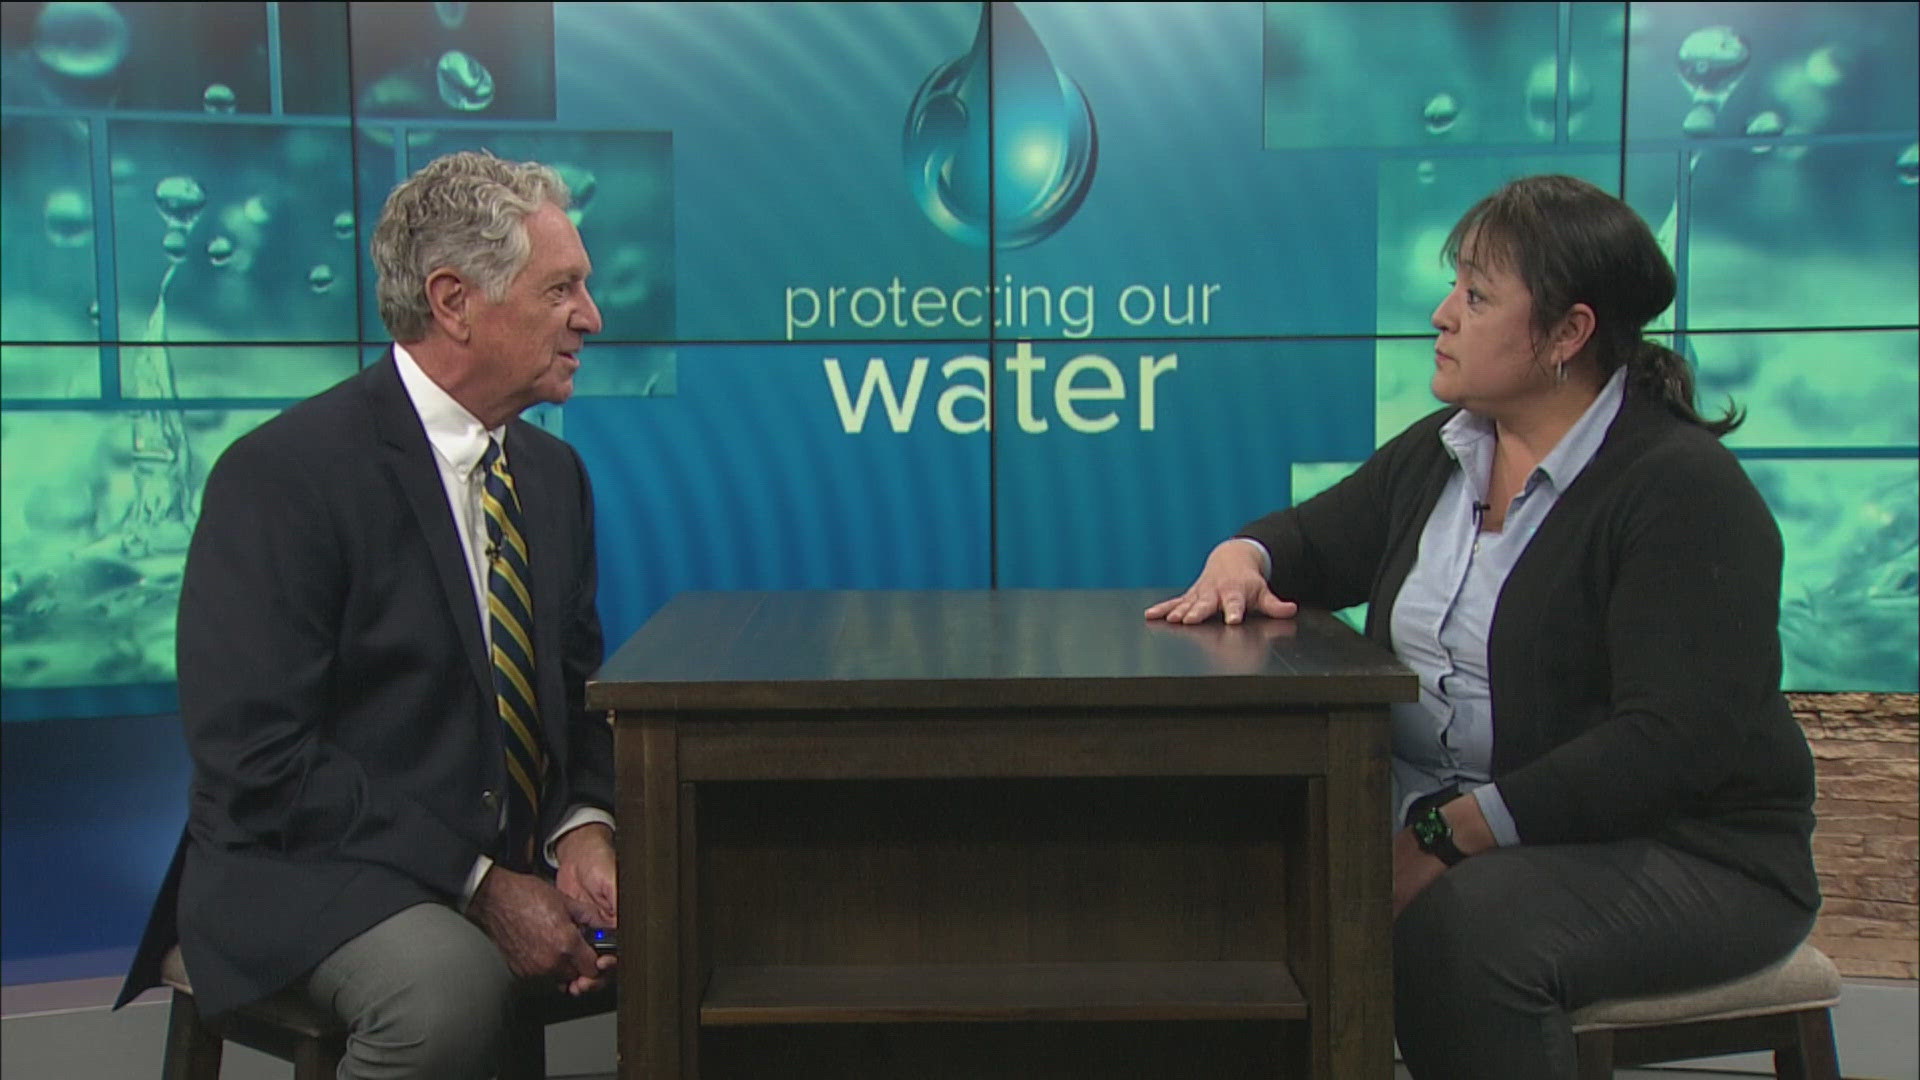 Cindy Geronimo, the commissioner of the Utilities Administration, talks with Dan Cummins about the work that's been done to ensure water safety in Toledo.